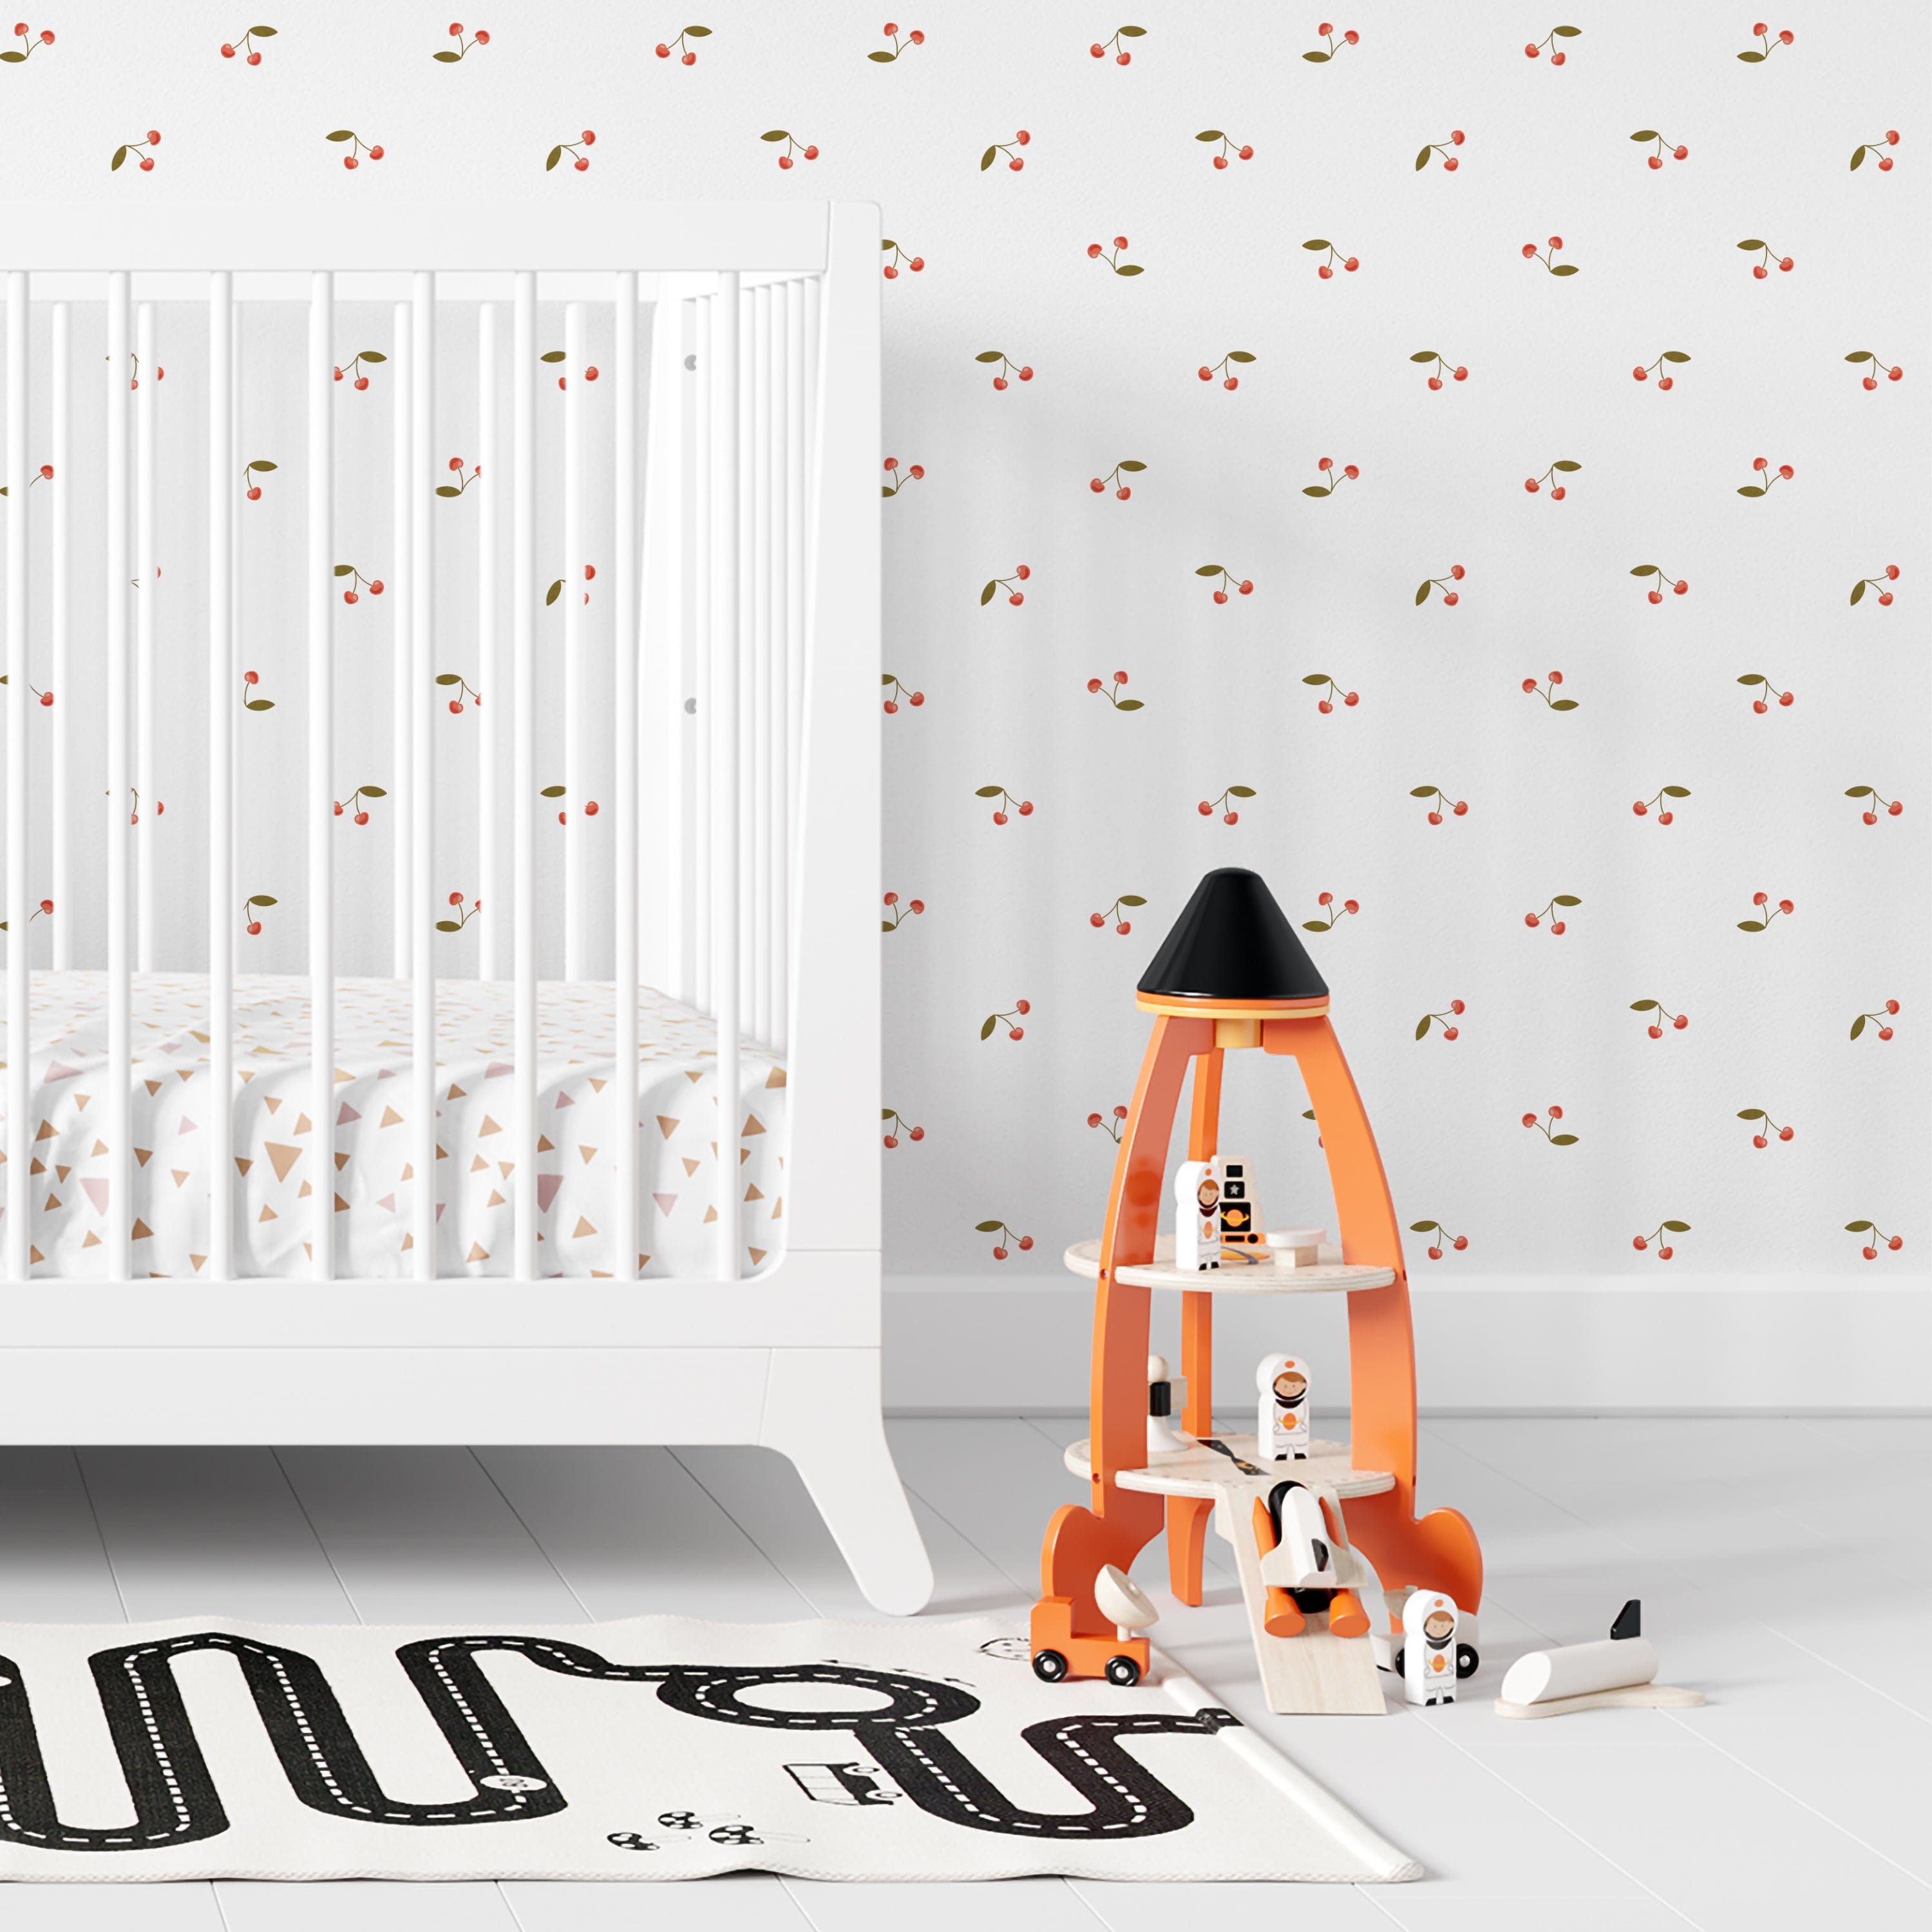 A child's nursery room wall covered with a minimalist cherry wallpaper, displaying small red cherries and green leaves on a white background, creating a playful and soothing environment